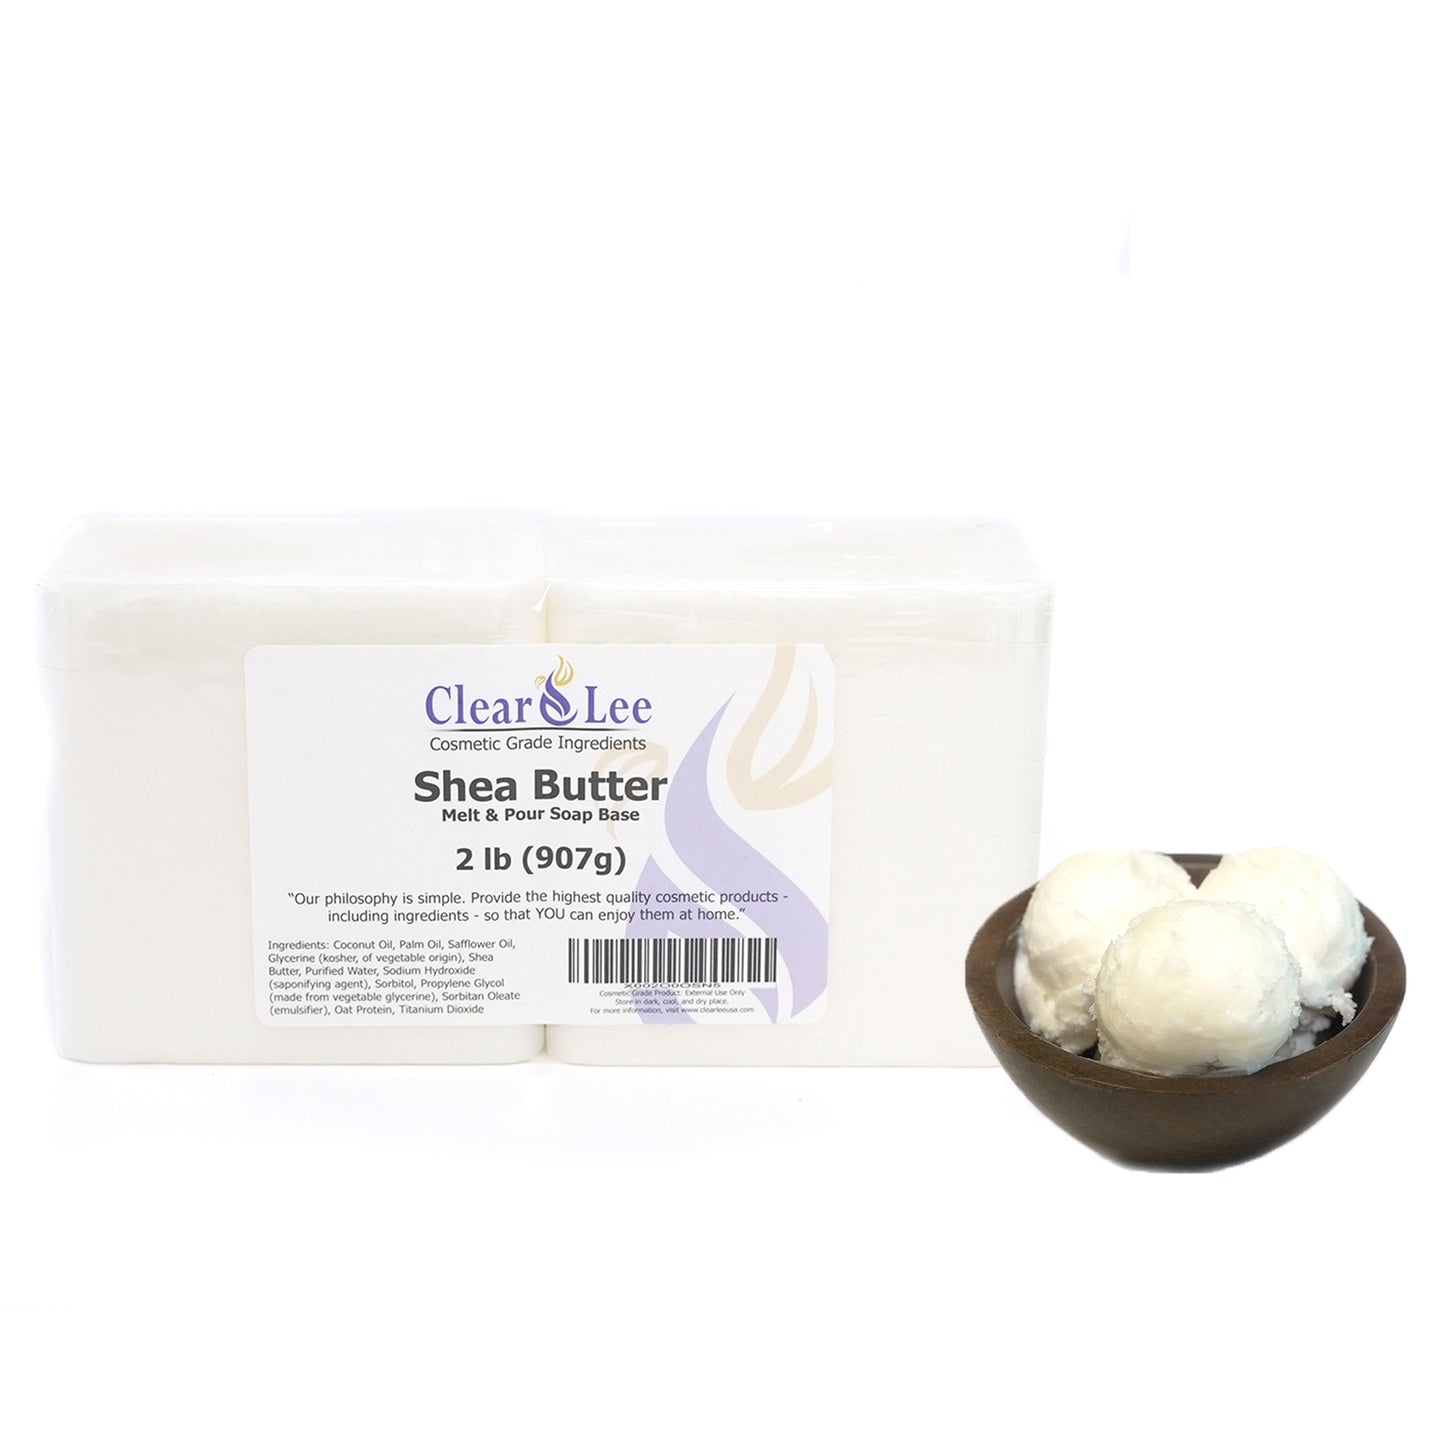 Detergent Free Shea Butter MP Soap, 2 lb block Product Detail @ Community  Candle and Soap Supply